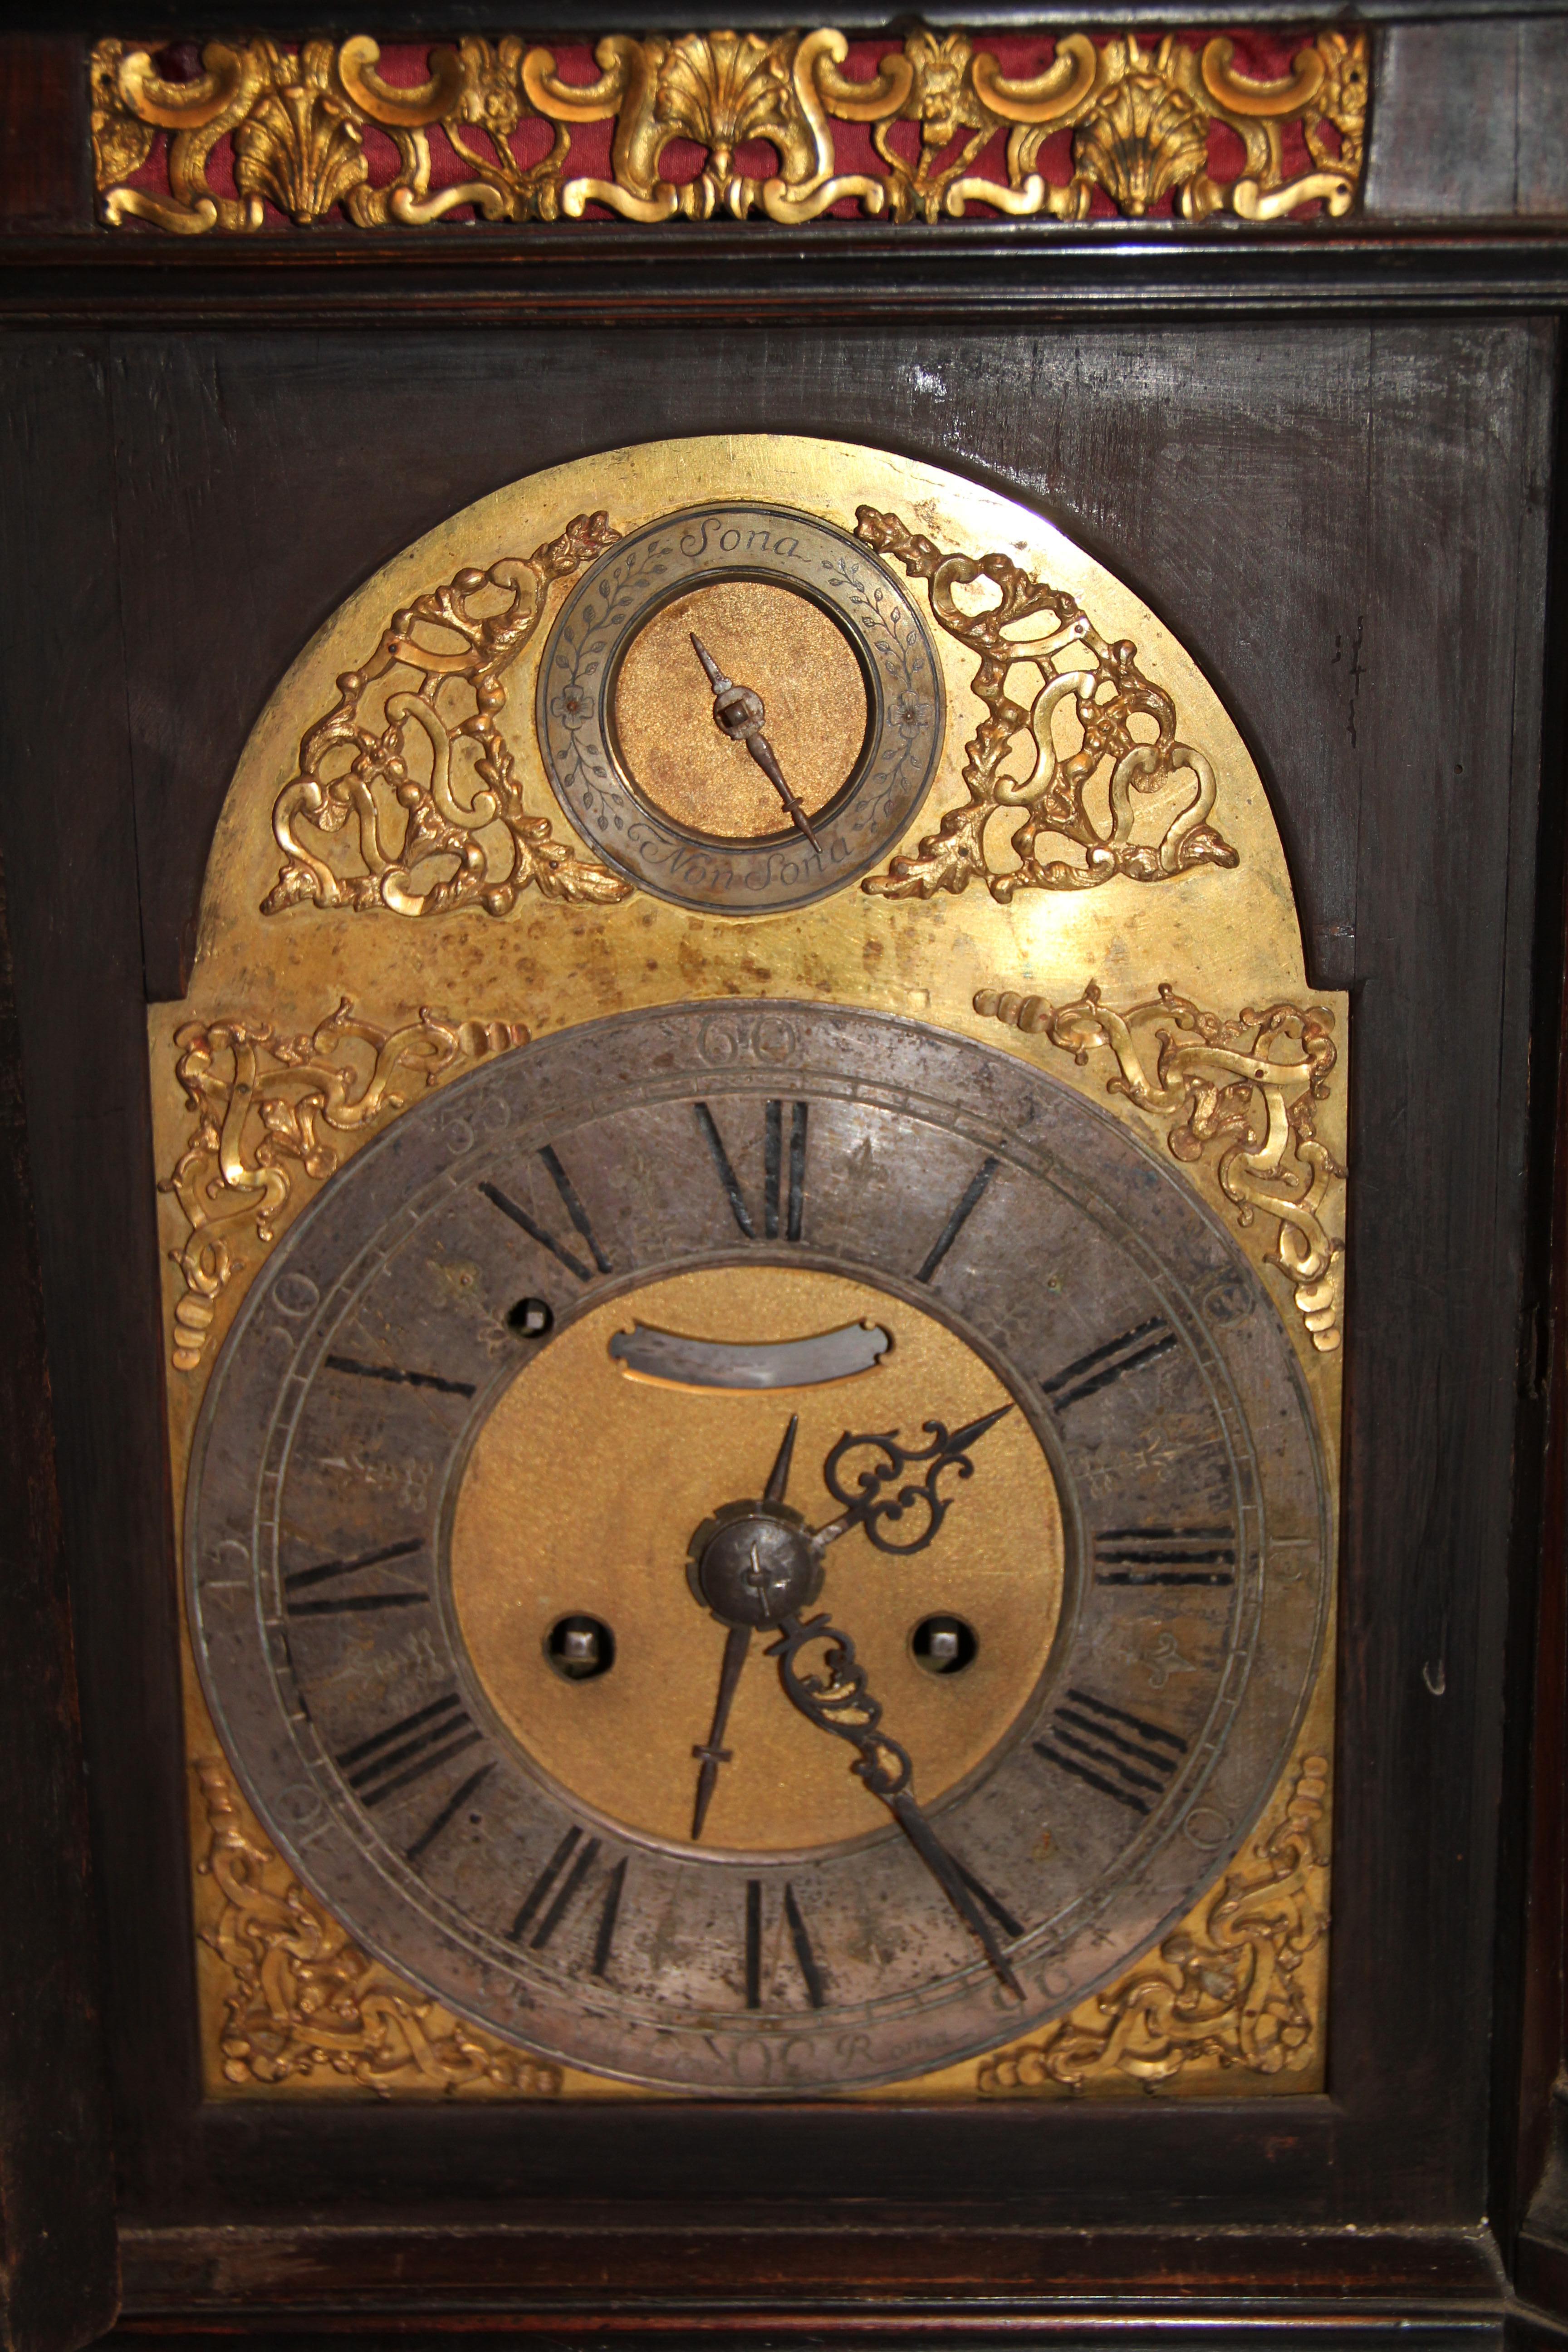 A clock in rosewood veneer and ebonized wood, verge escapement, twin spring powered, dual bell, time strike and alarm, architectural bracket clock, made by “Villacroce”, (clockmaker in “Roma”), circa third quarter of the 18th century.

Case: 24